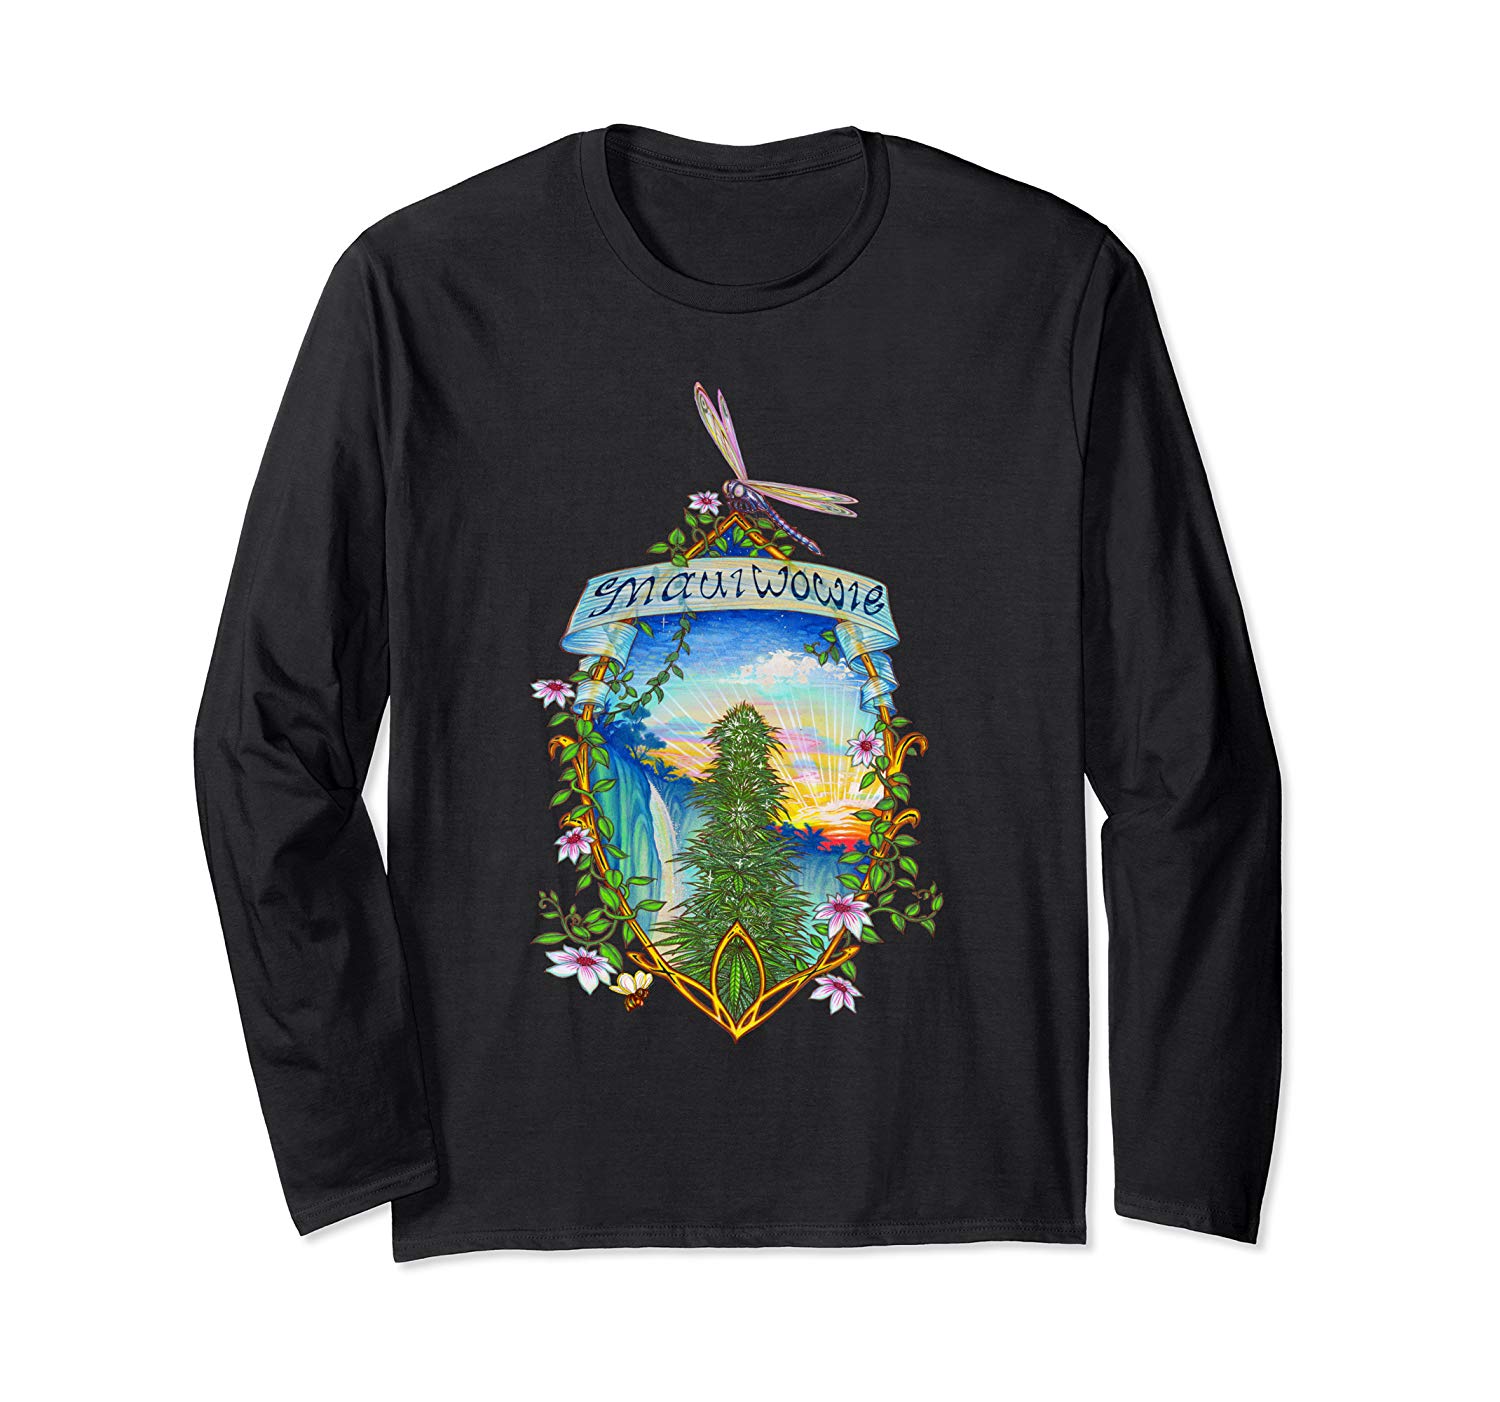 Image of a black colored Maui Wowie Vintage Marijuana Long Sleeve T-shirt from Ganja Outpost.